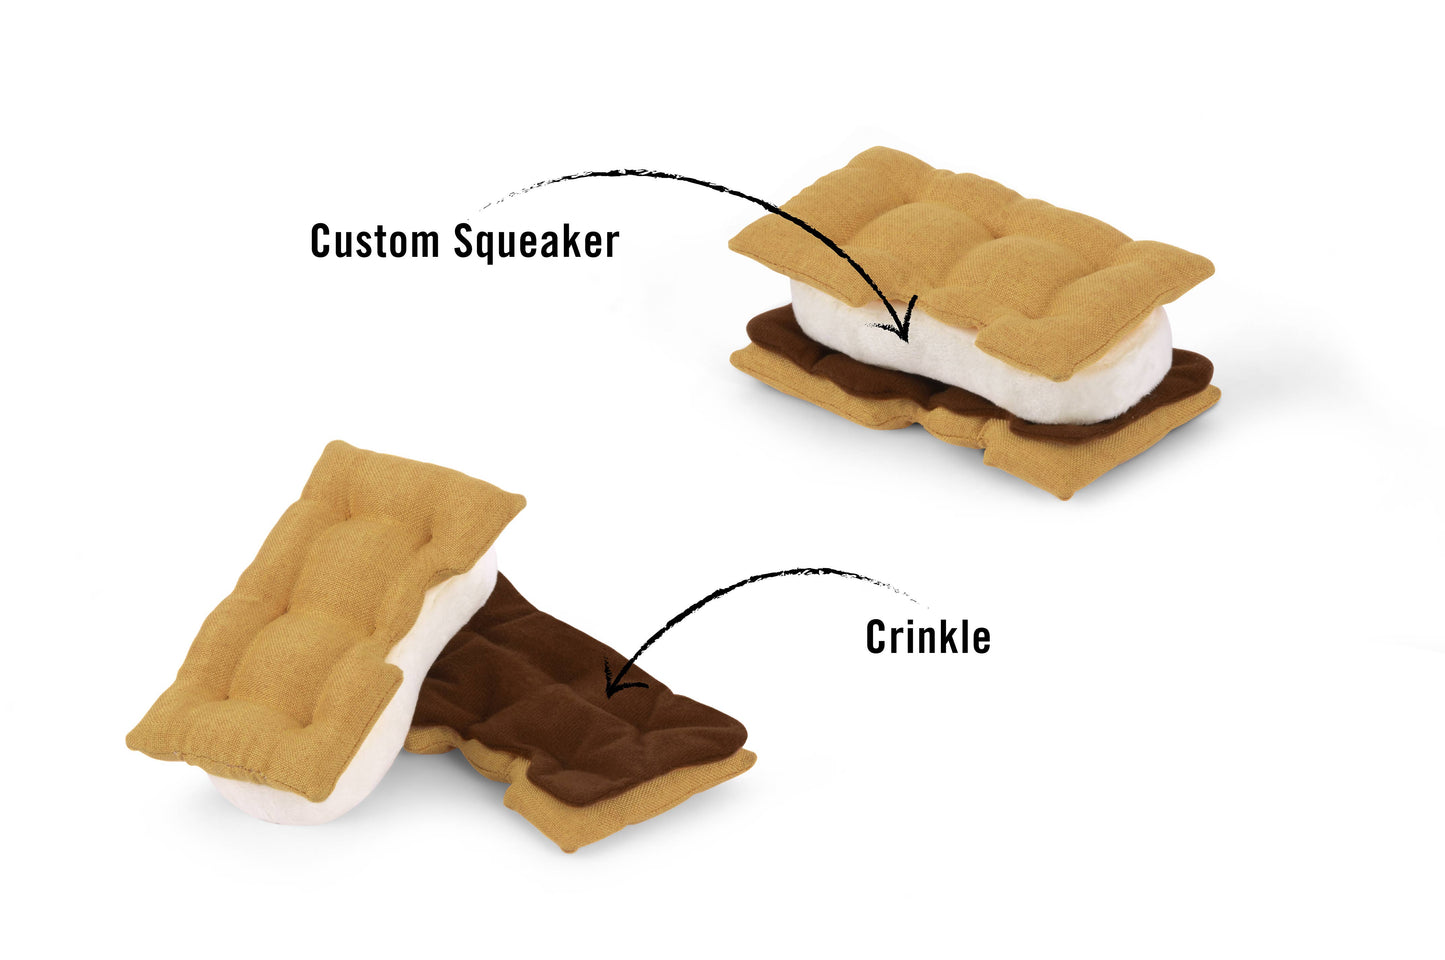 S’mores Dog Toy